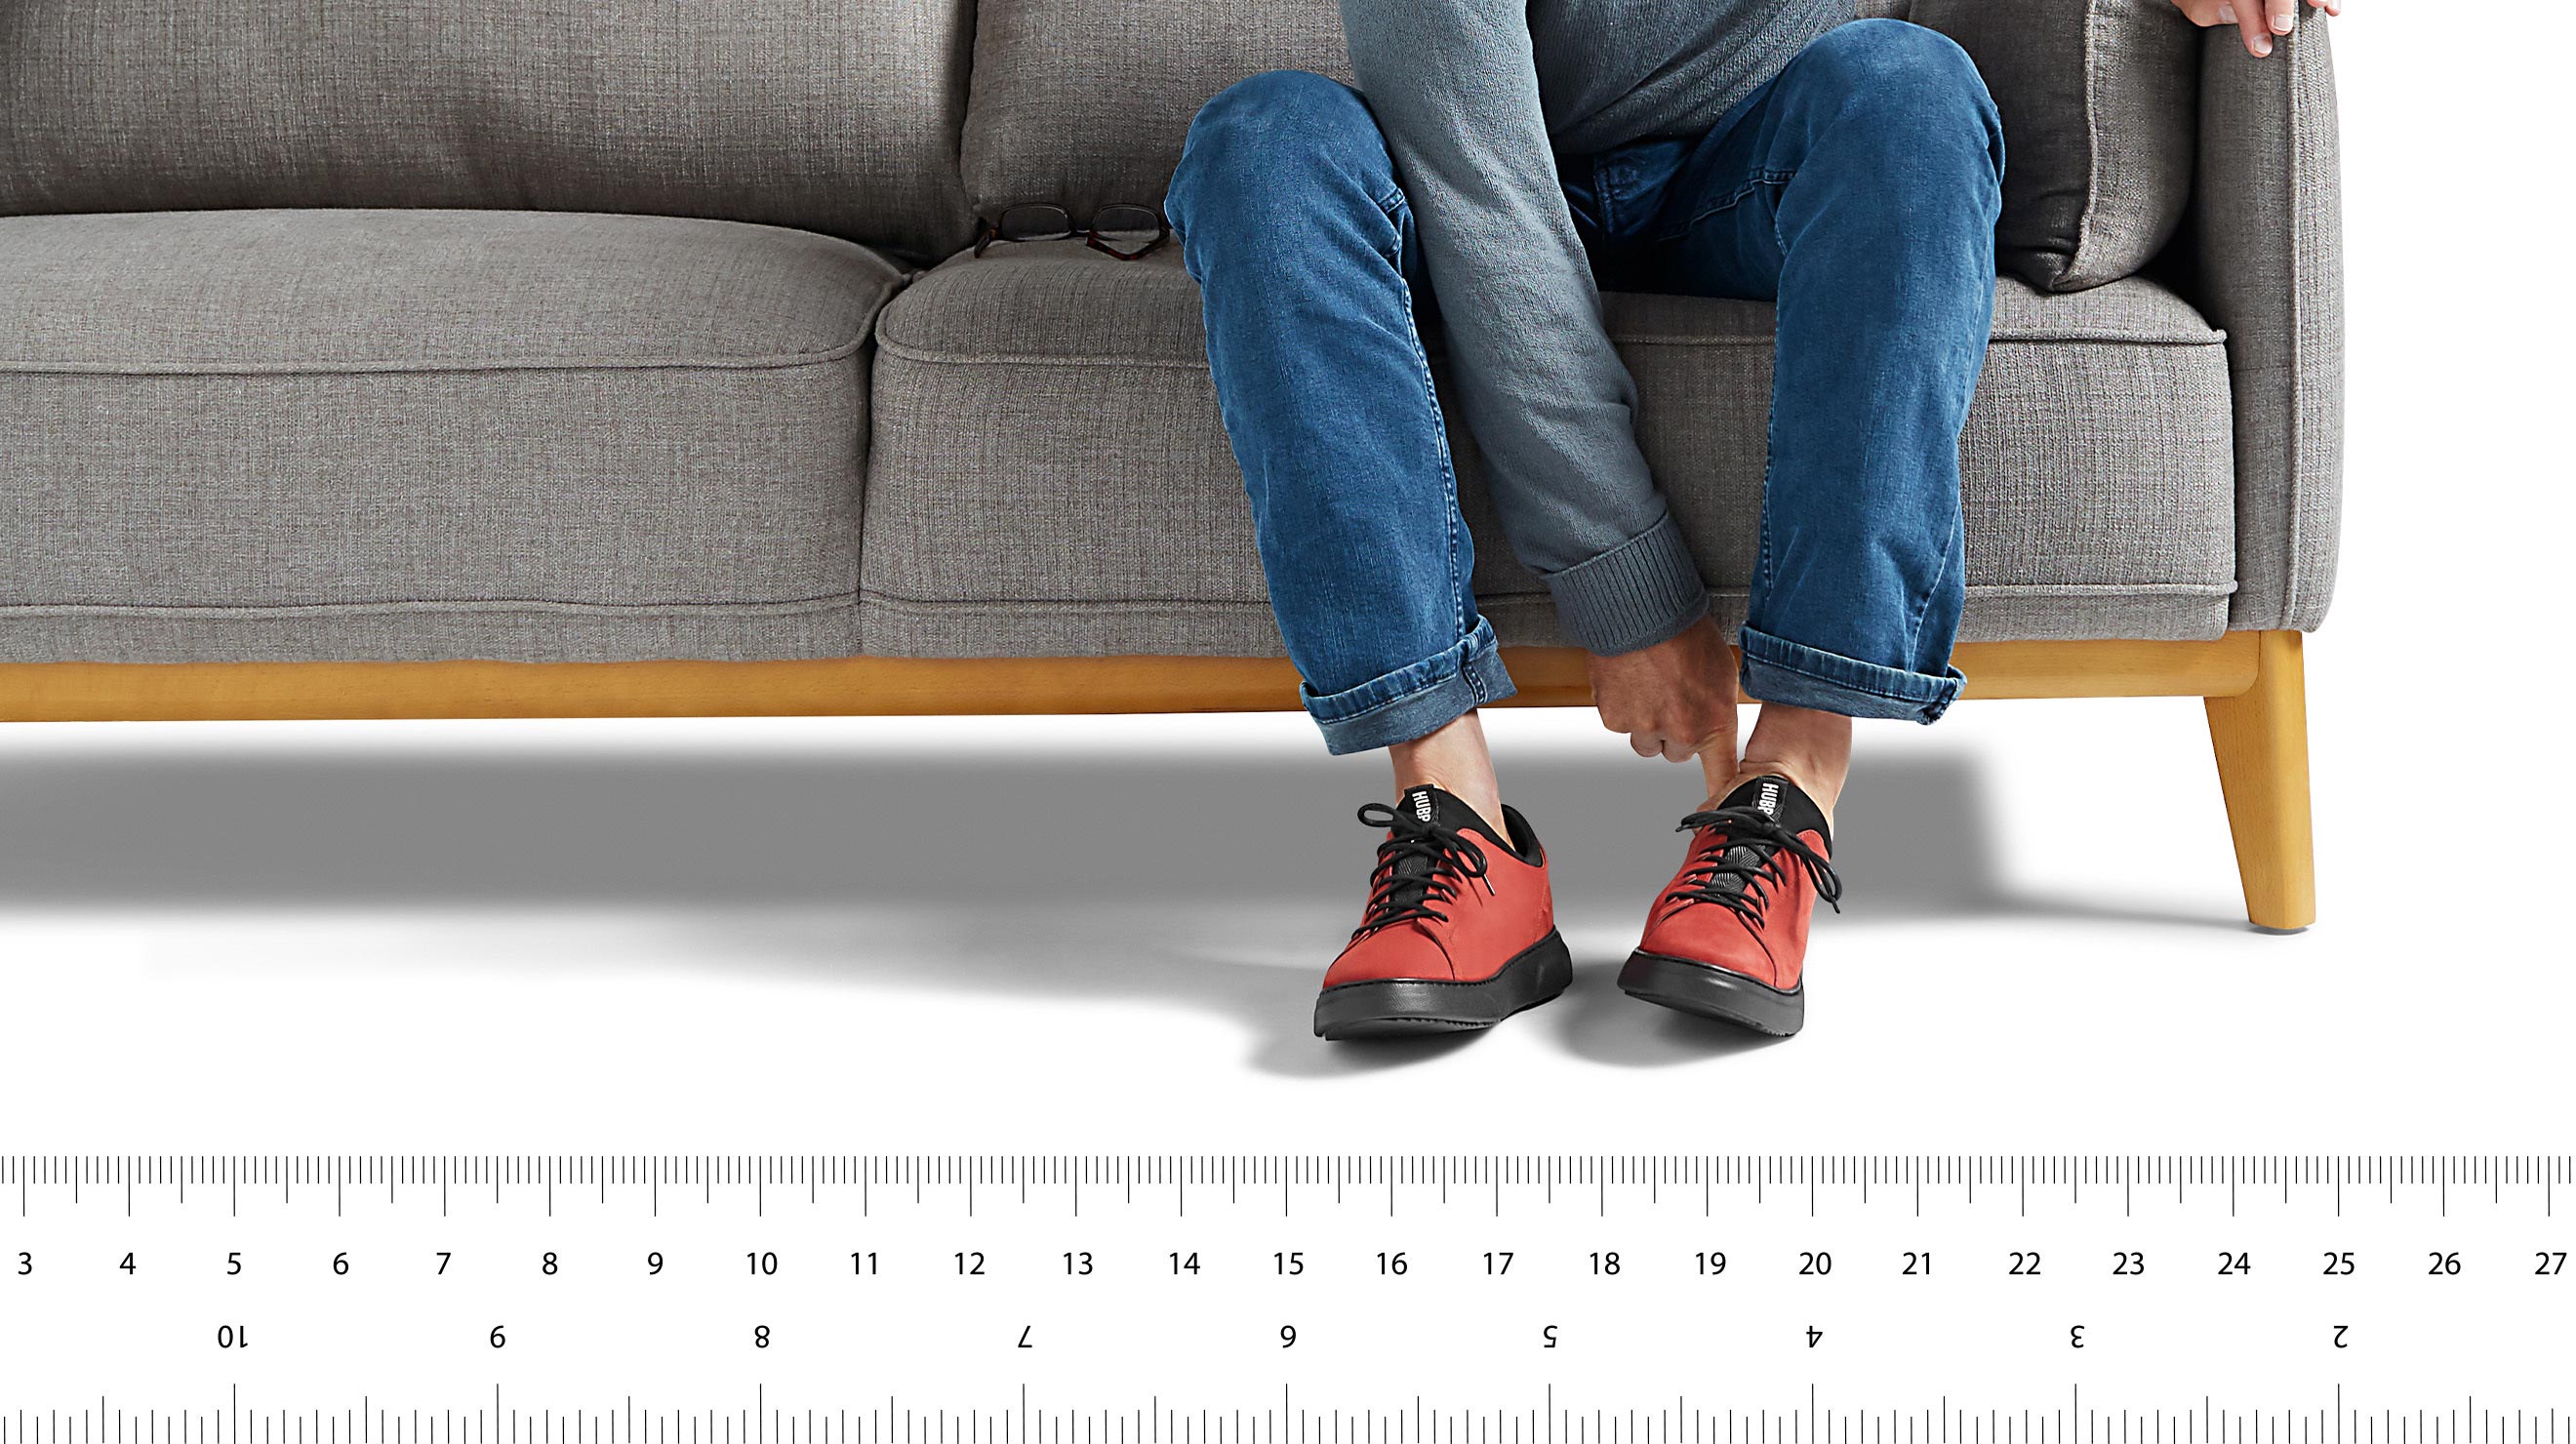 Average Shoe Size for Women Is Larger Than You Think